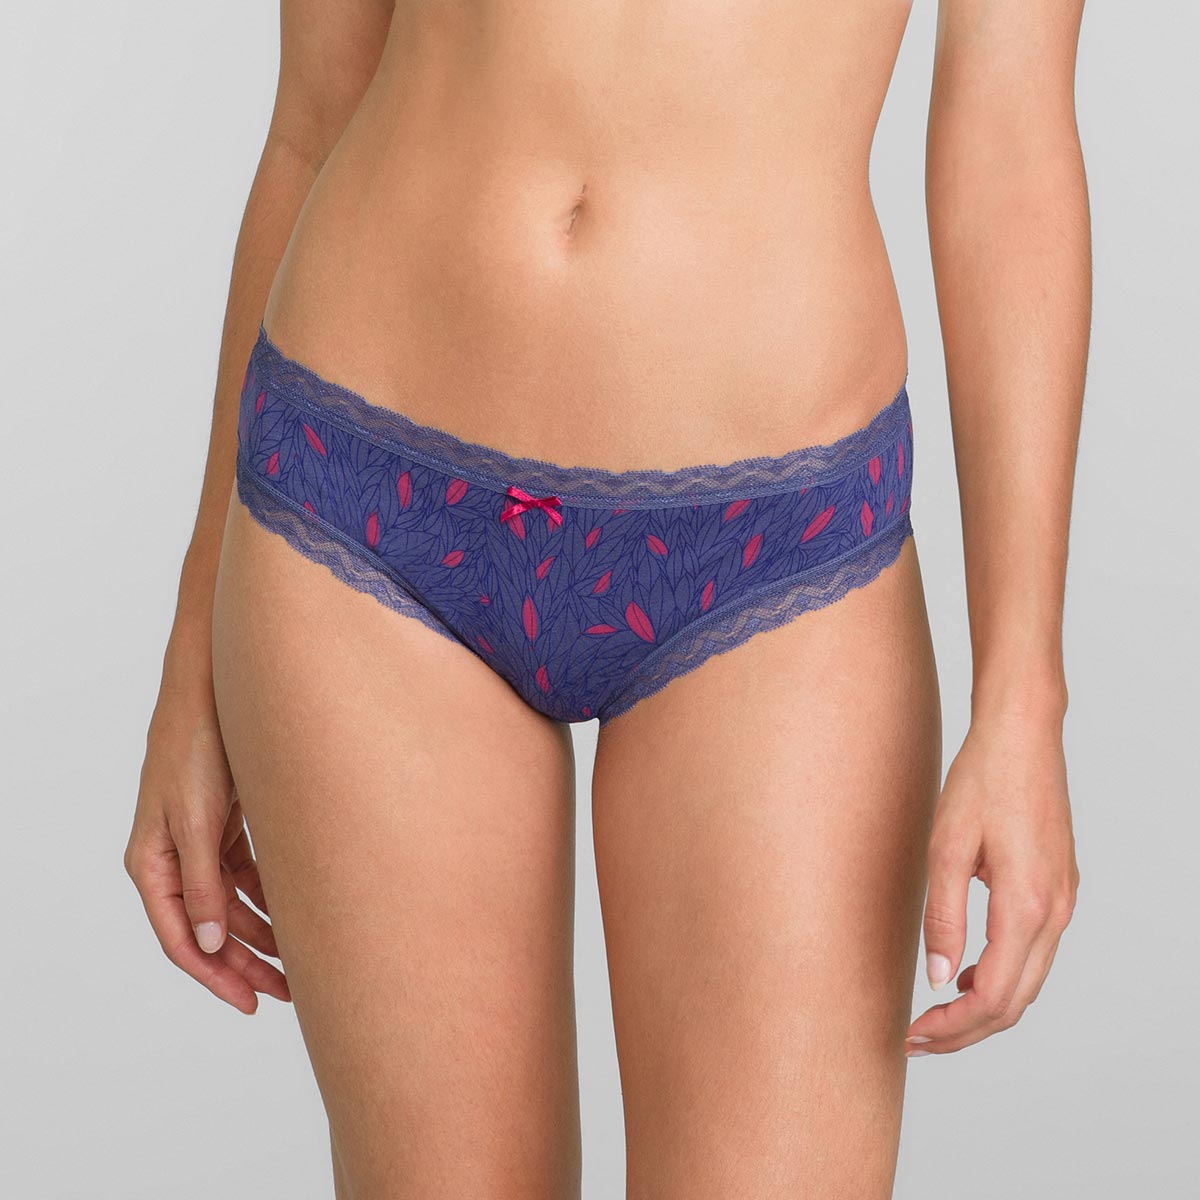 Knickers in Graphic Leaves Print Cotton Fancy 2 pack, , PLAYTEX